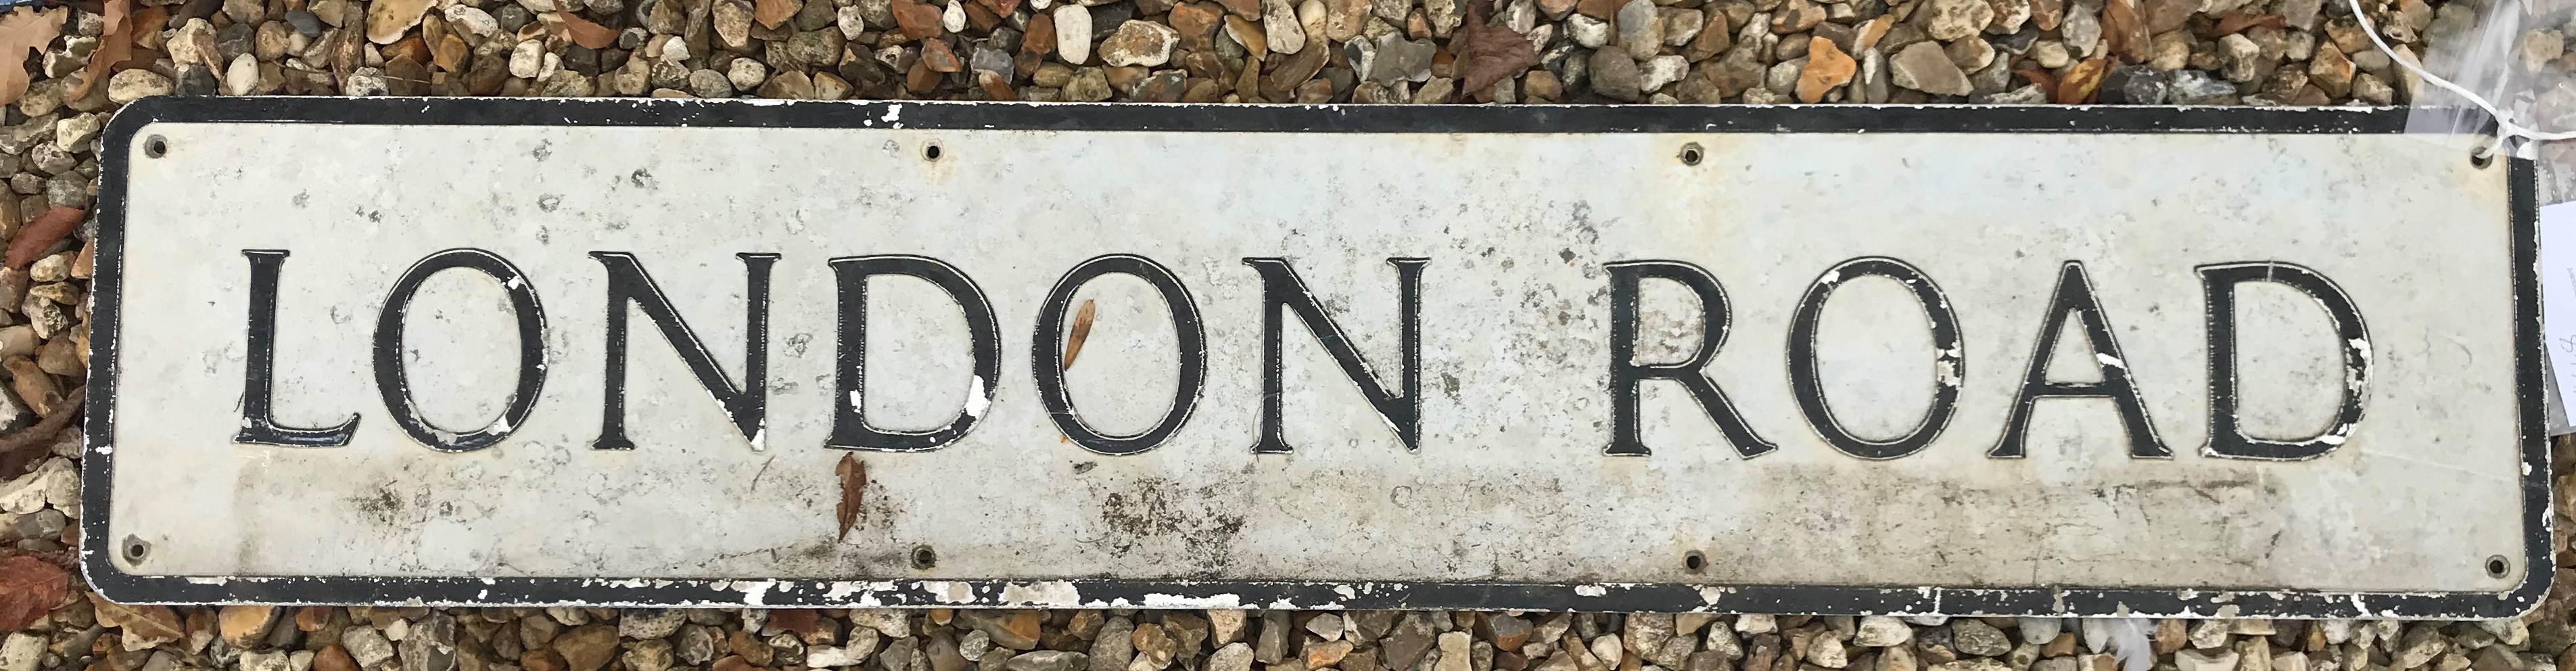 A painted metal street sign inscribed "London Road" 109 cm x 23 cm